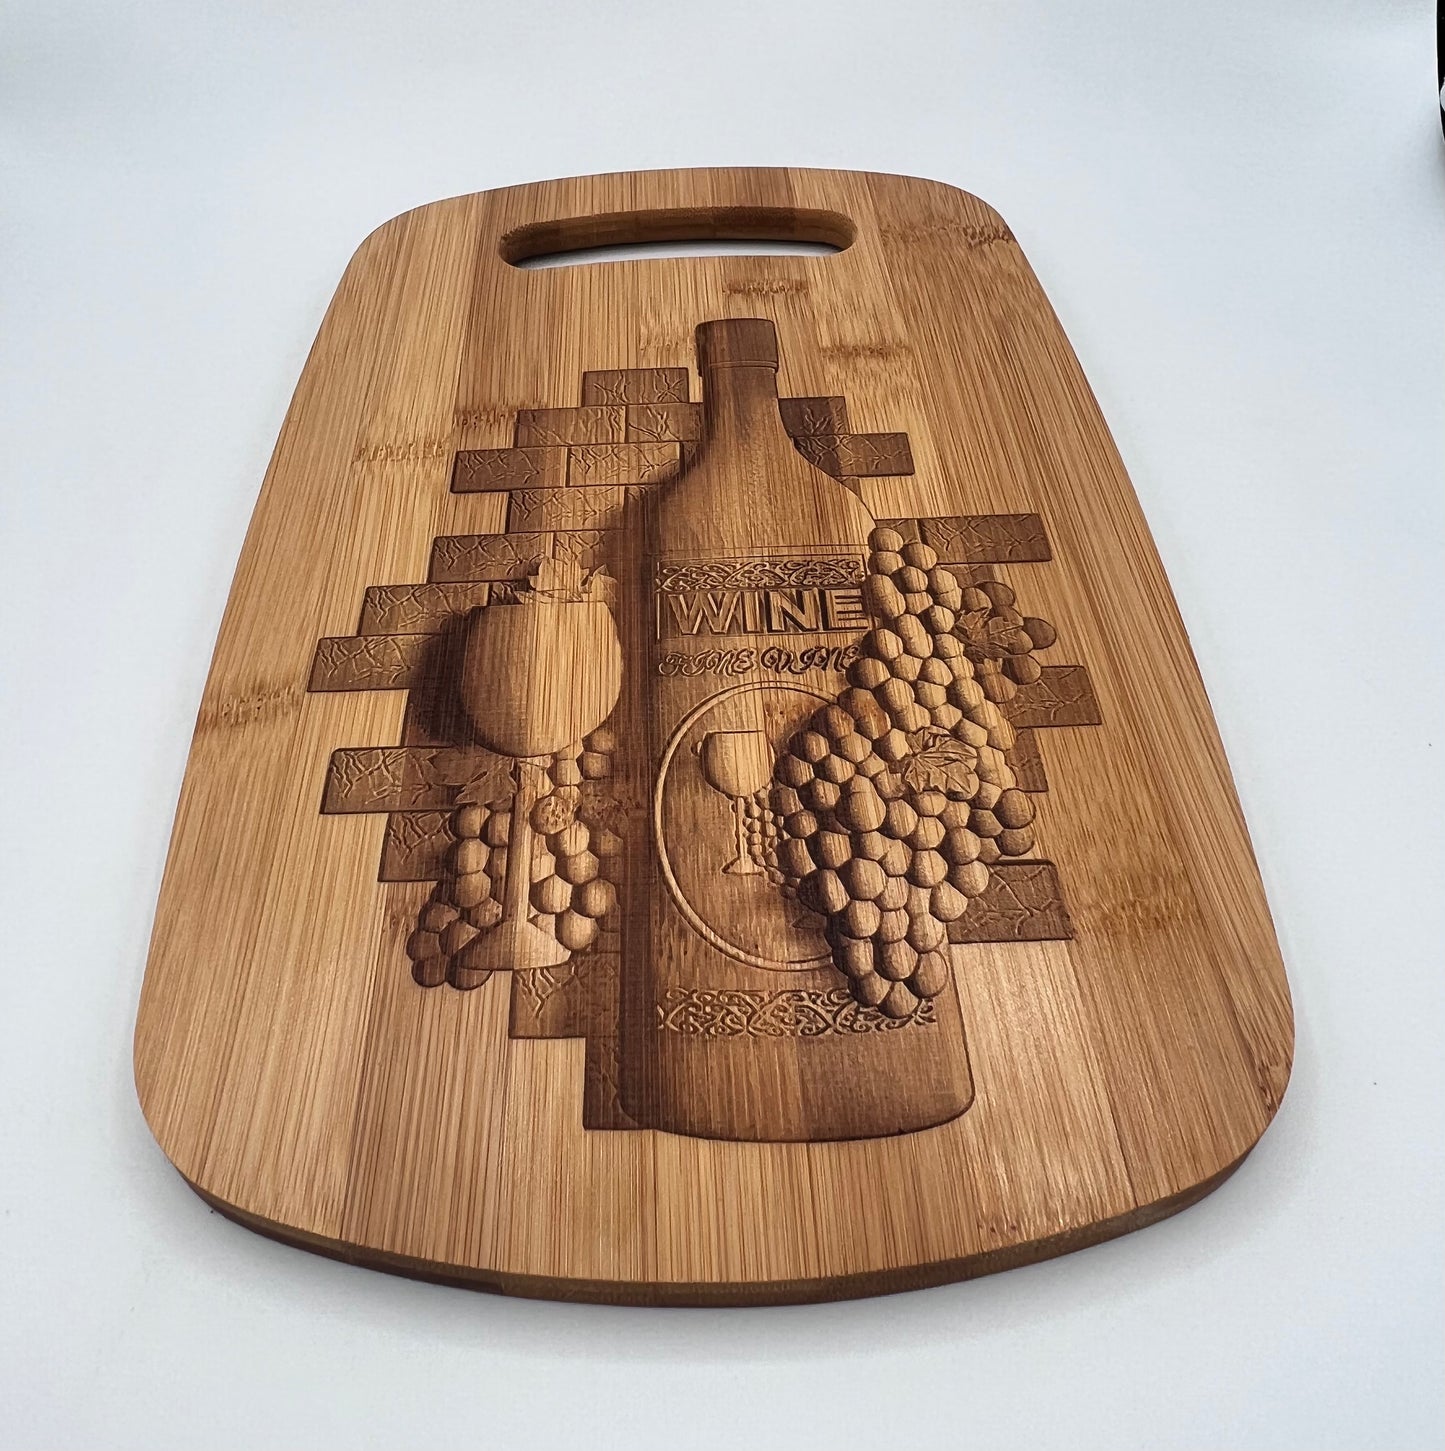 Wine Bottle Engraved on Bamboo Cutting Board